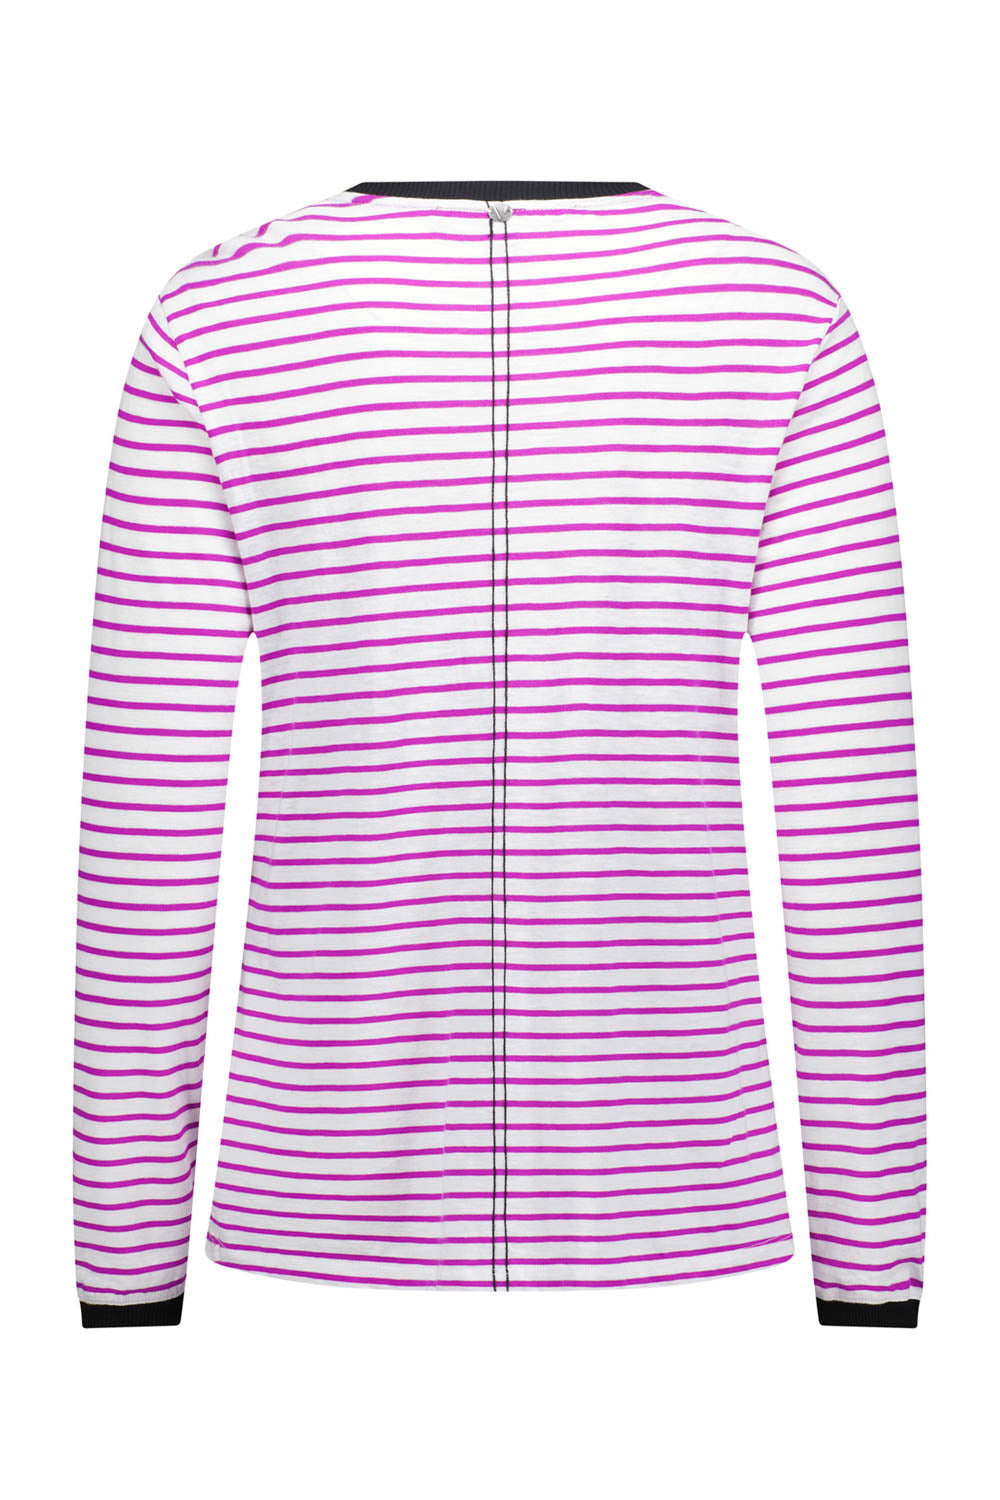 VERGE KIT TOP - ORCHID STRIPE - THE VOGUE STORE